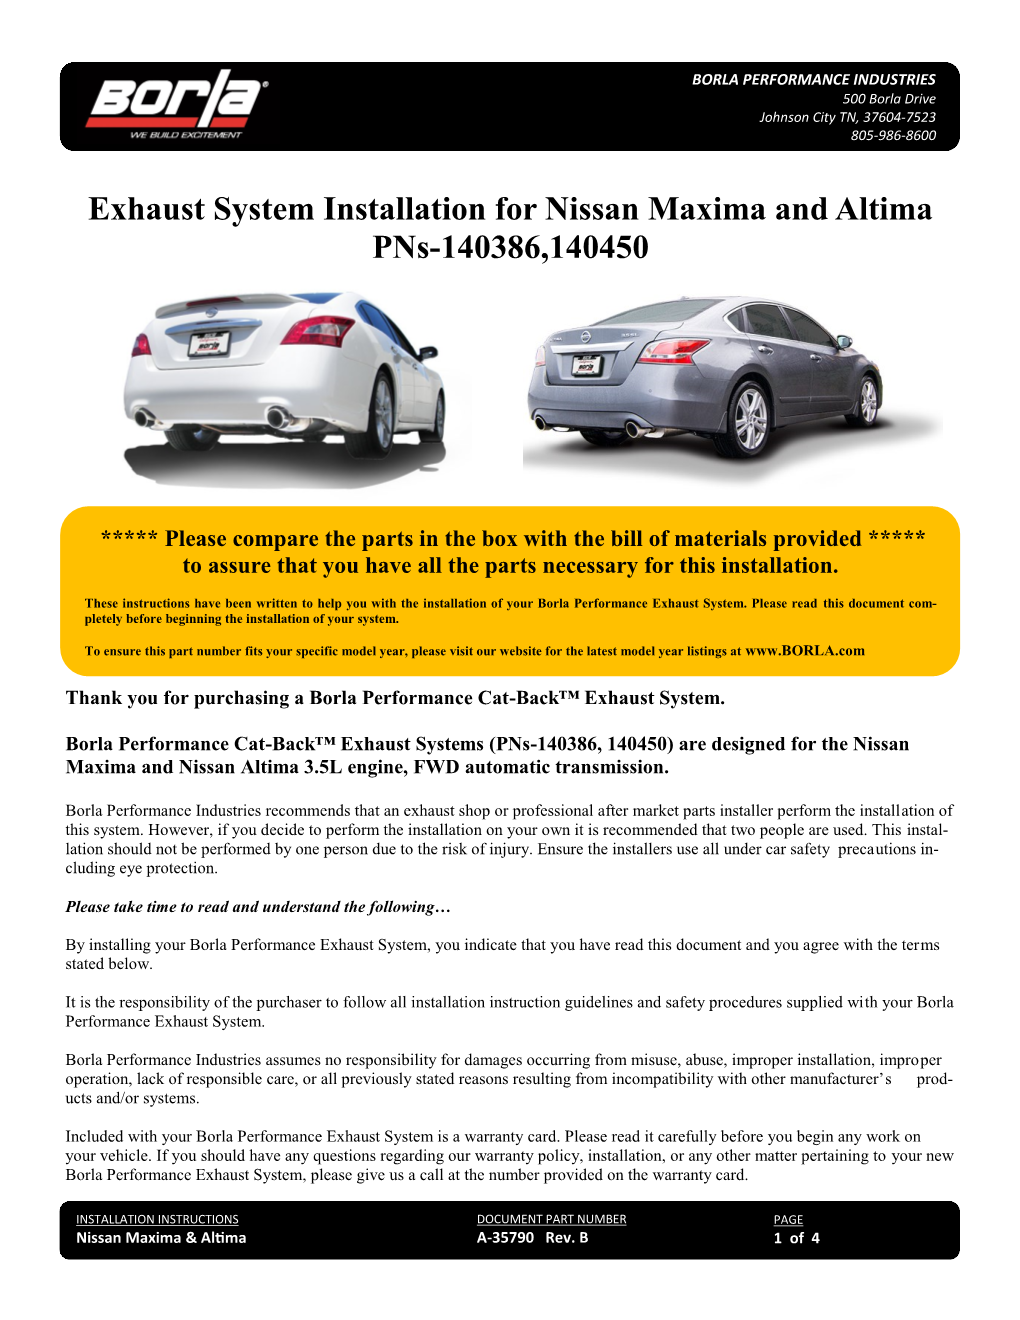 Exhaust System Installation for Nissan Maxima and Altima Pns-140386,140450